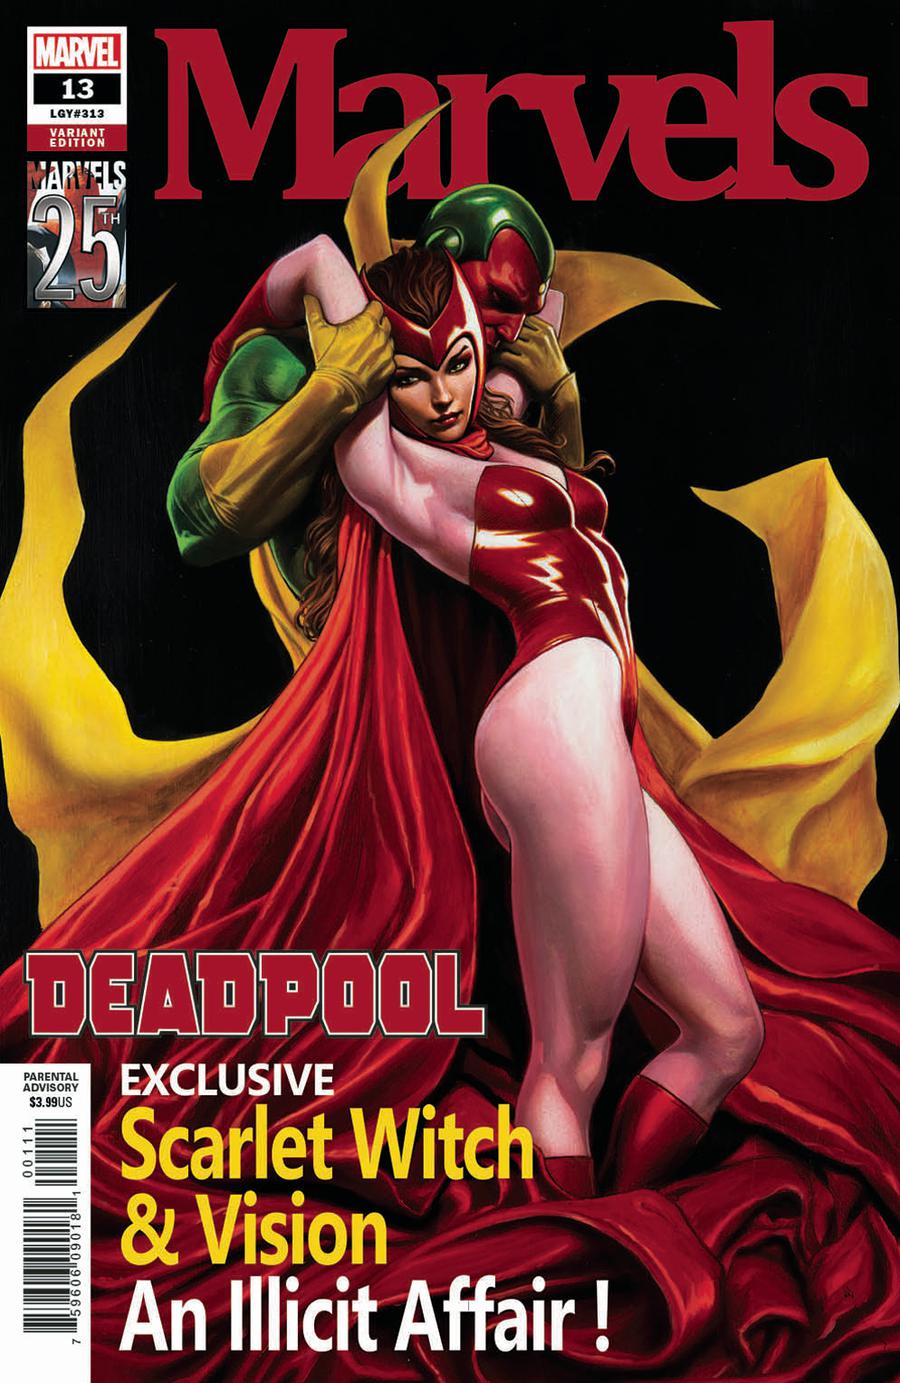 Deadpool Vol 6 #13 Cover B Variant Adi Granov Marvels 25th Tribute Cover (War Of The Realms Tie-In)